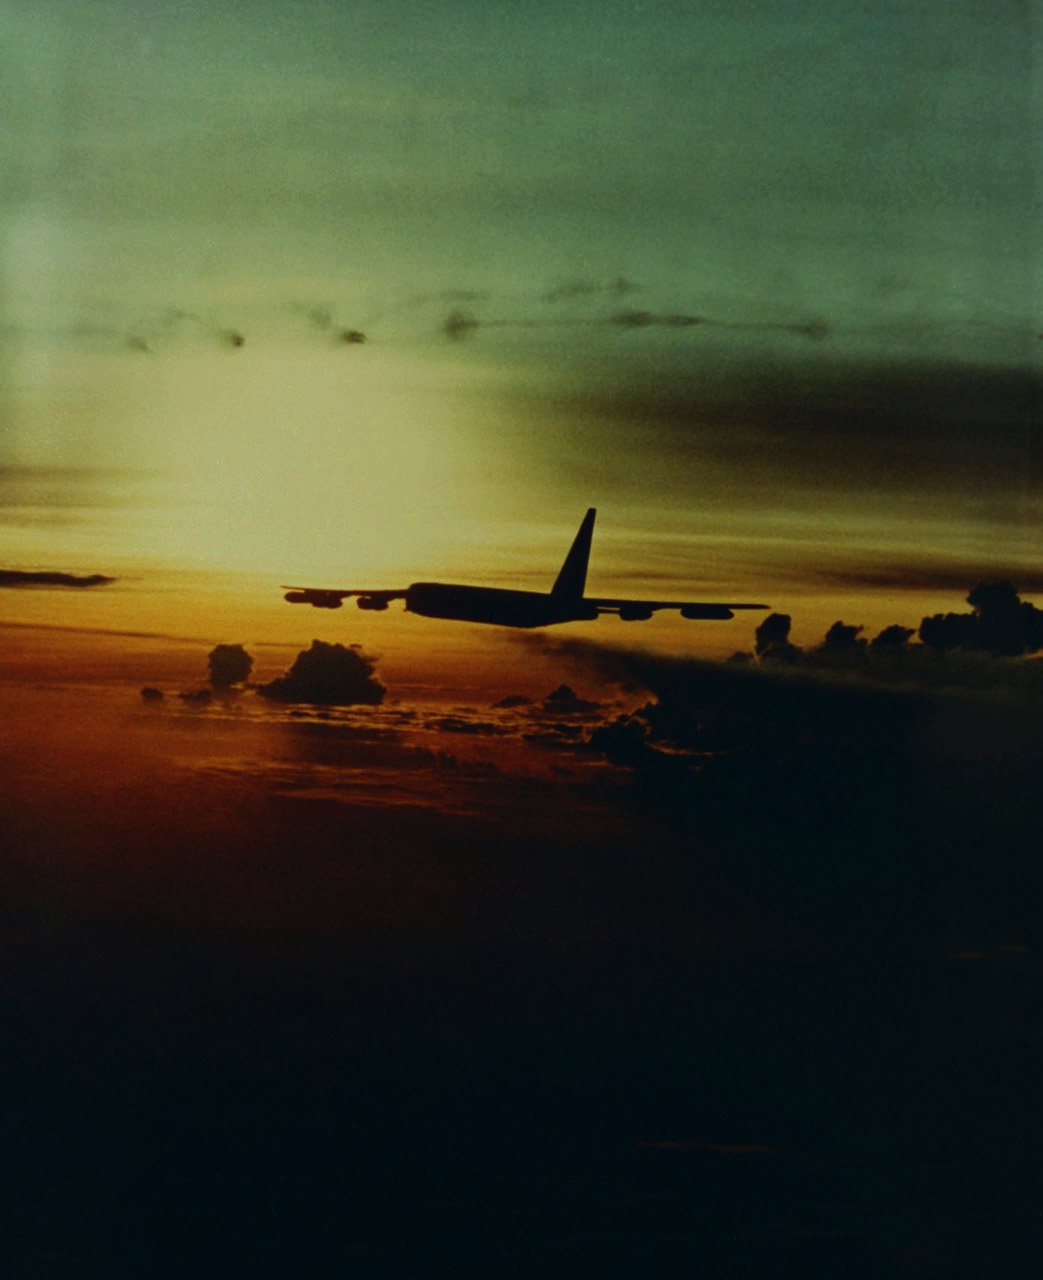 A Boeing B-52D Stratofortress of the 307th Strategic Wing over Vietnam during Operation Linebacker II, December 1972. (U.S. Air Force)